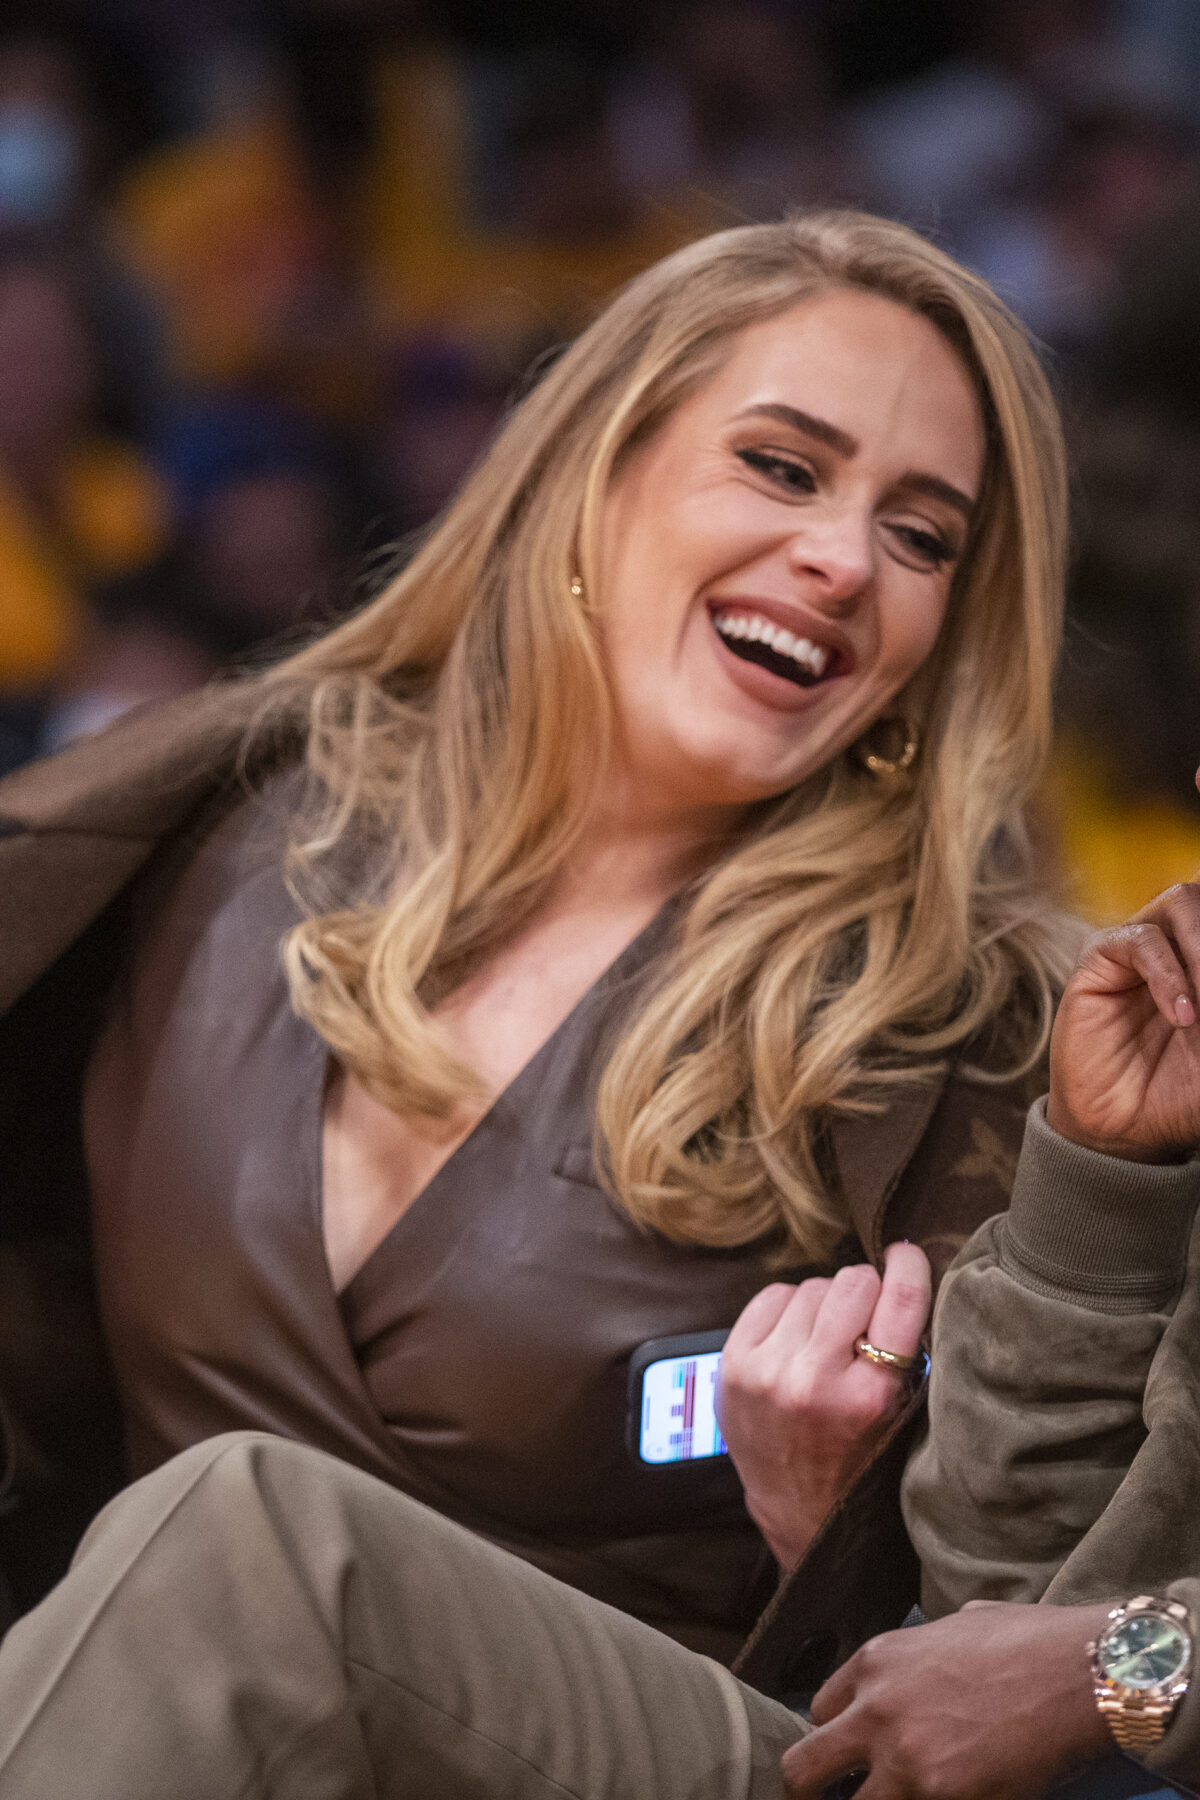 Los Angeles, CA - October 19: Singer Adele attends a game between the Golden State Warriors and the Los Angeles Lakers on October 19, 2021 at STAPLES Center in Los Angeles.